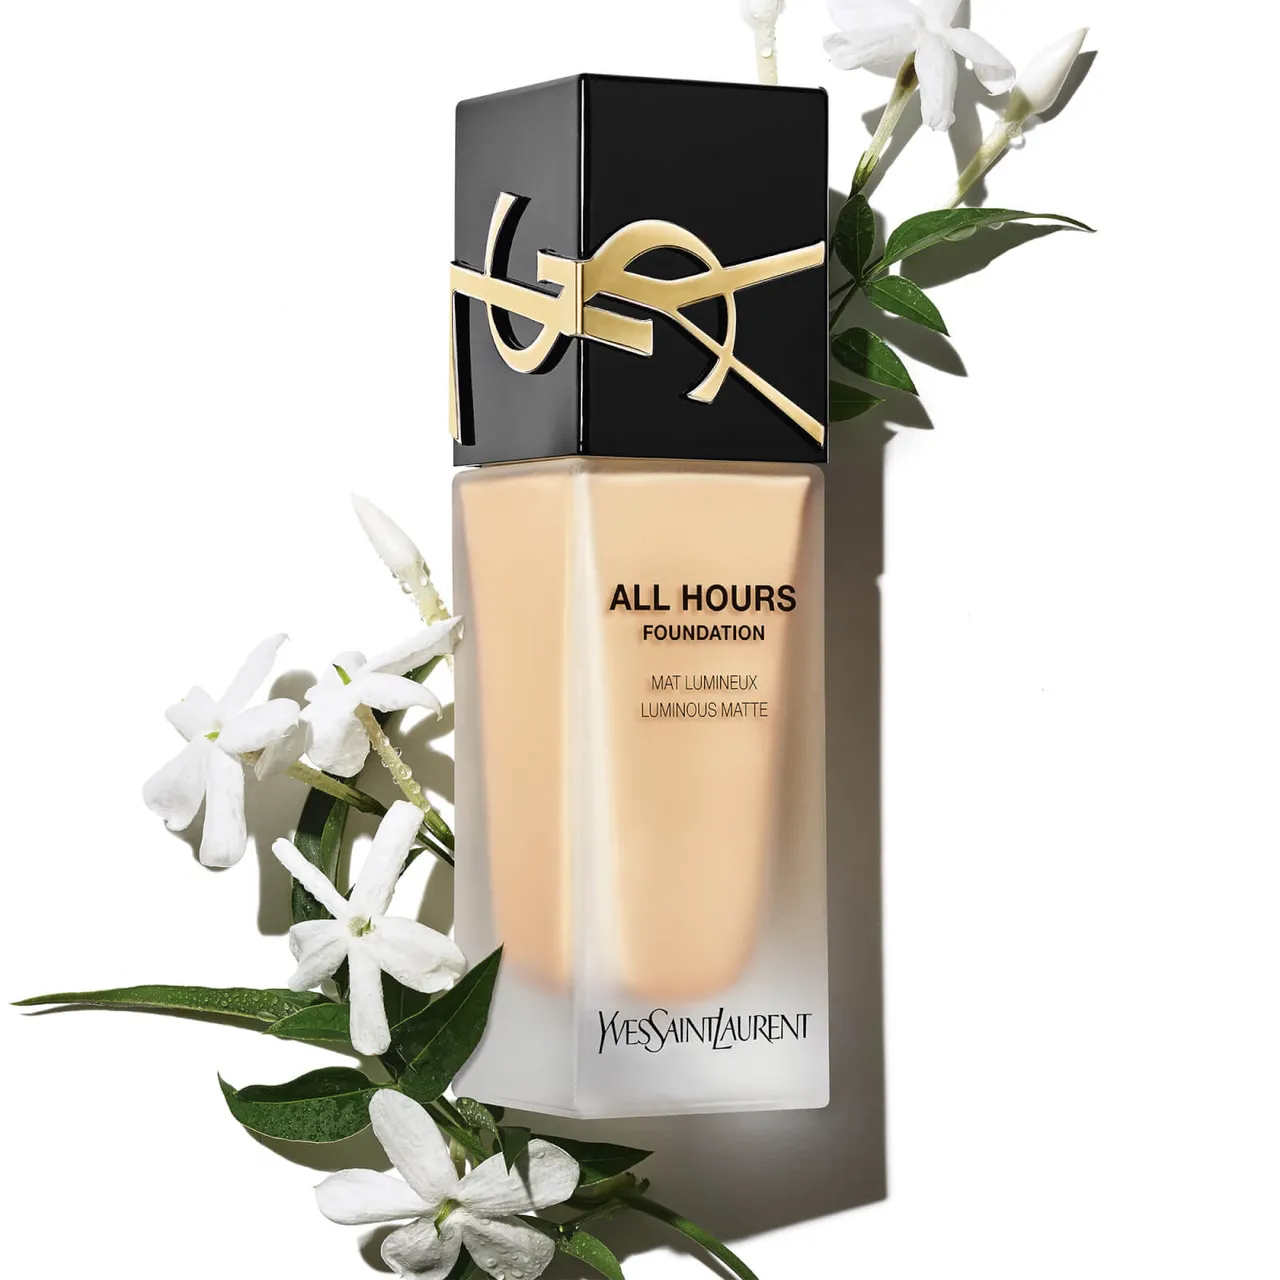 Yves Saint Laurent All Hours Luminous Matte Foundation with SPF 39 25ml (Various Shades) - DW4